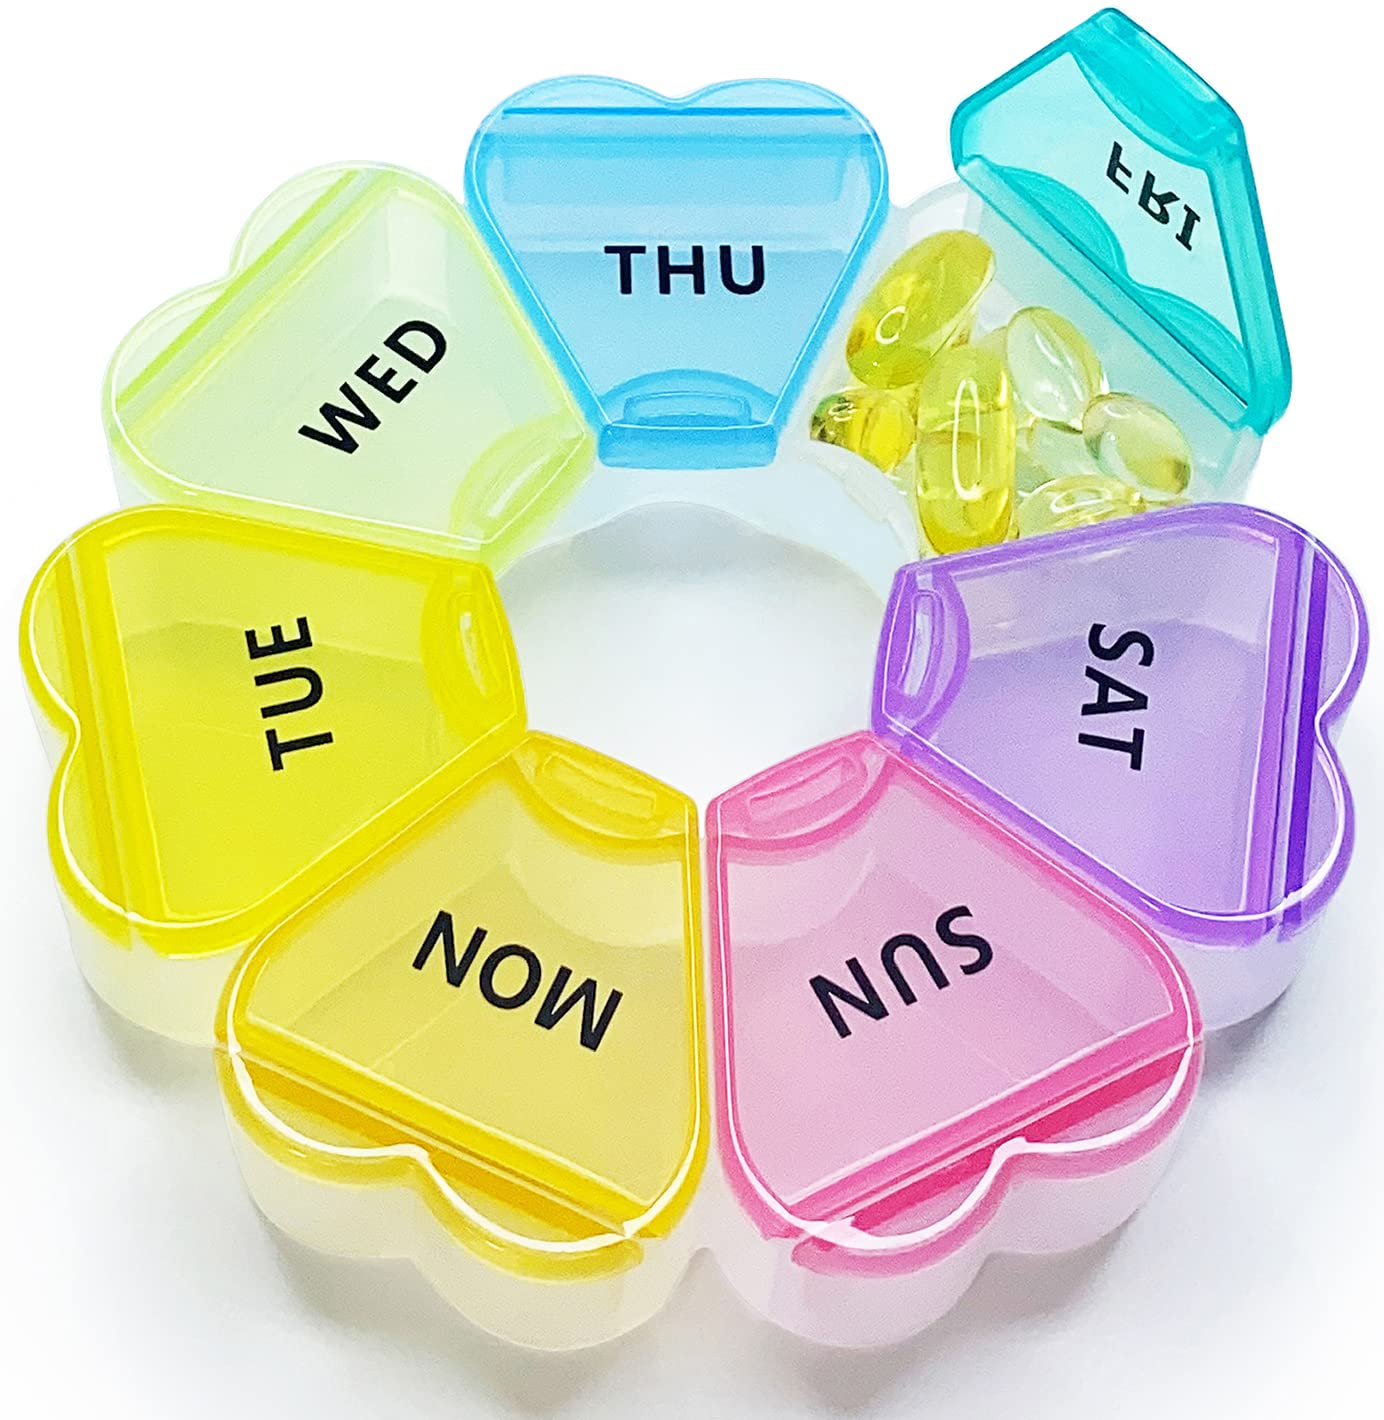 Weekly Pill Organizer Once a Day, PULIV Small Daily Pill Box 7 Day